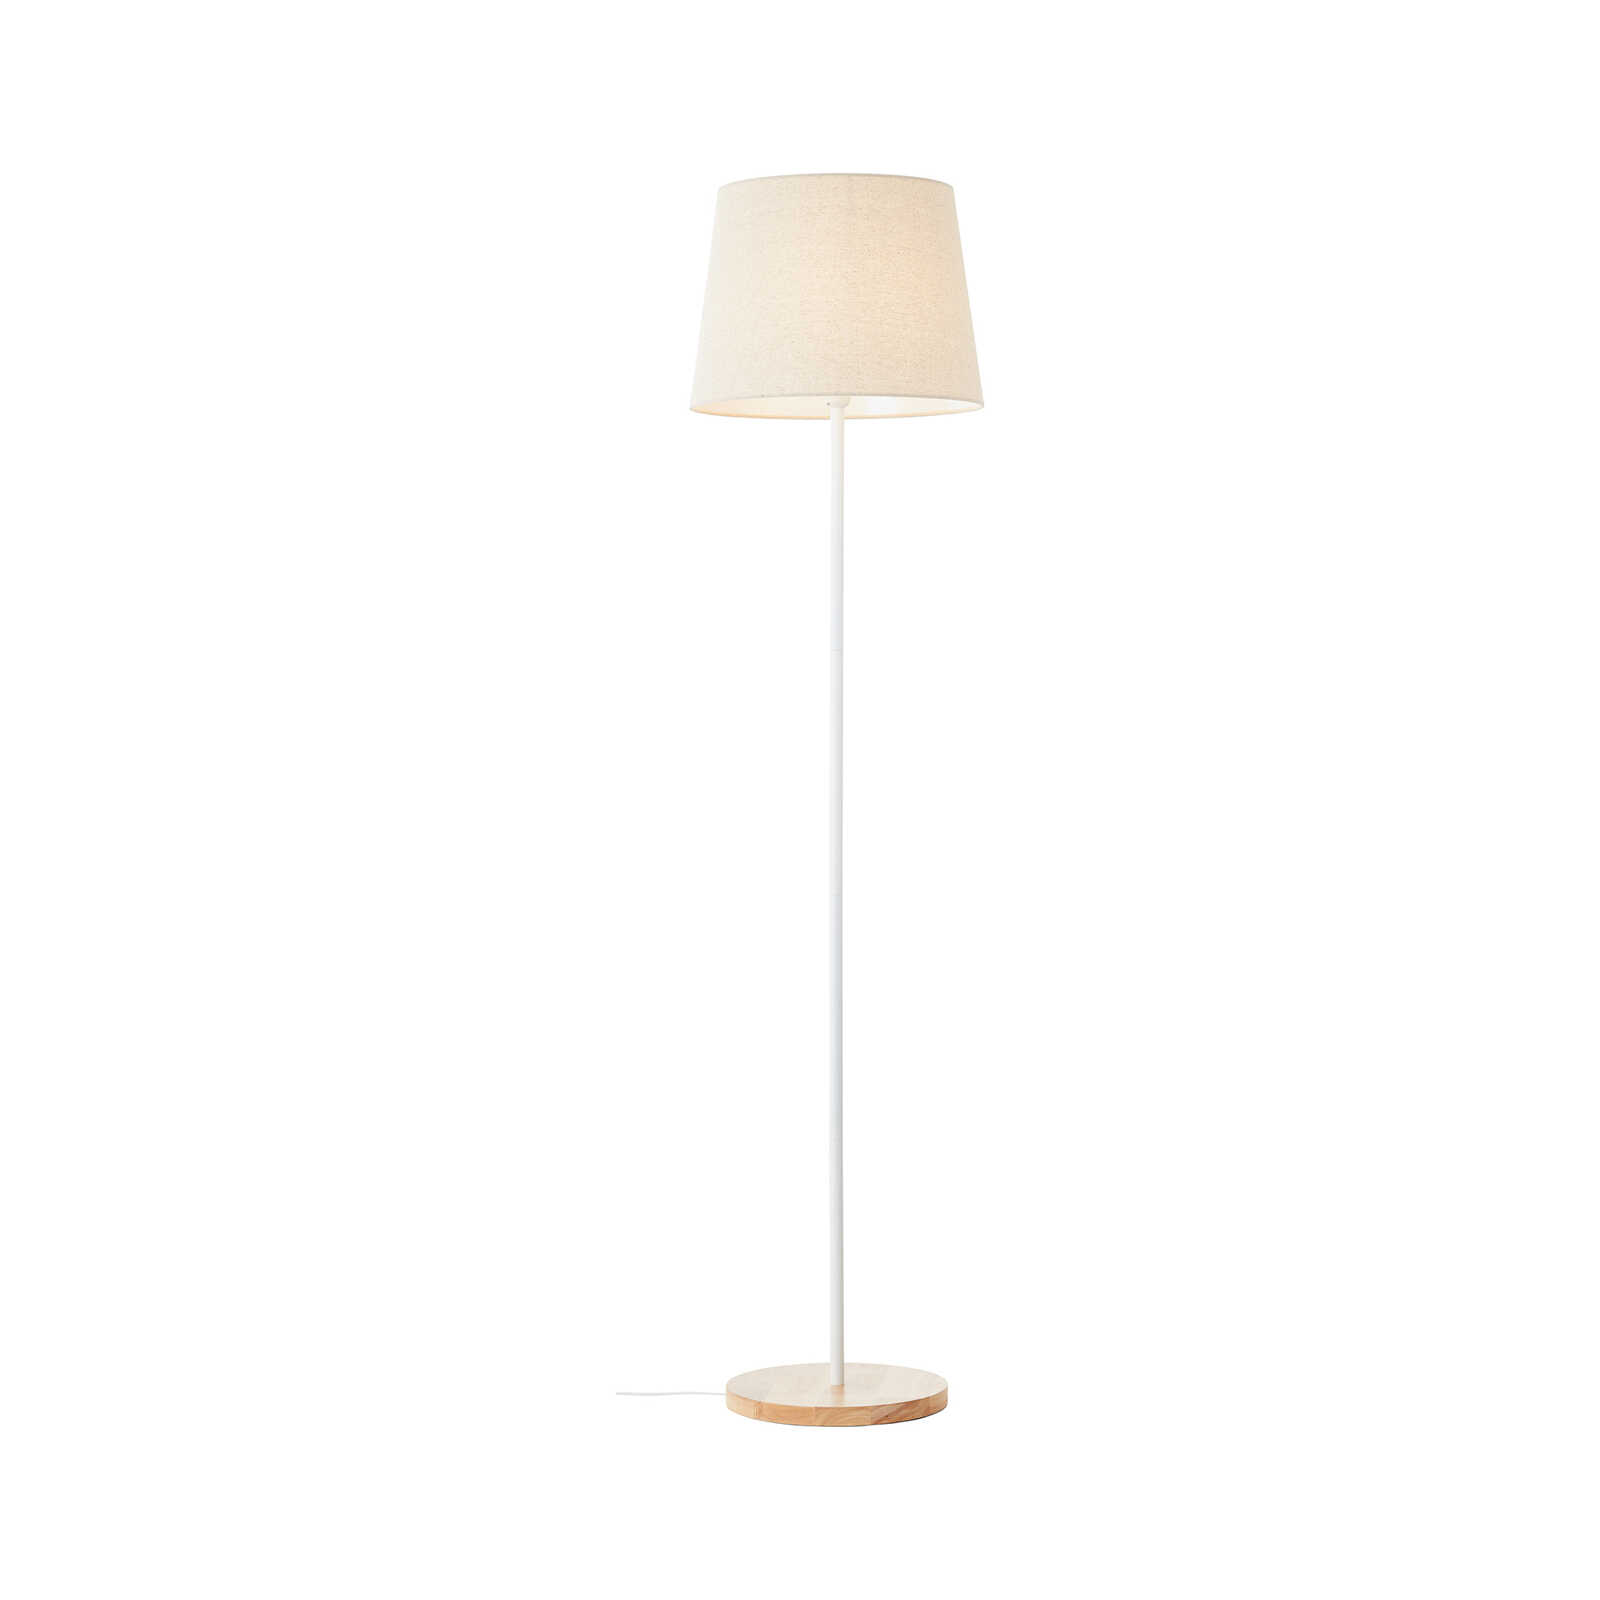 Floor lamp made of textile - Lenni 2 - Brown
